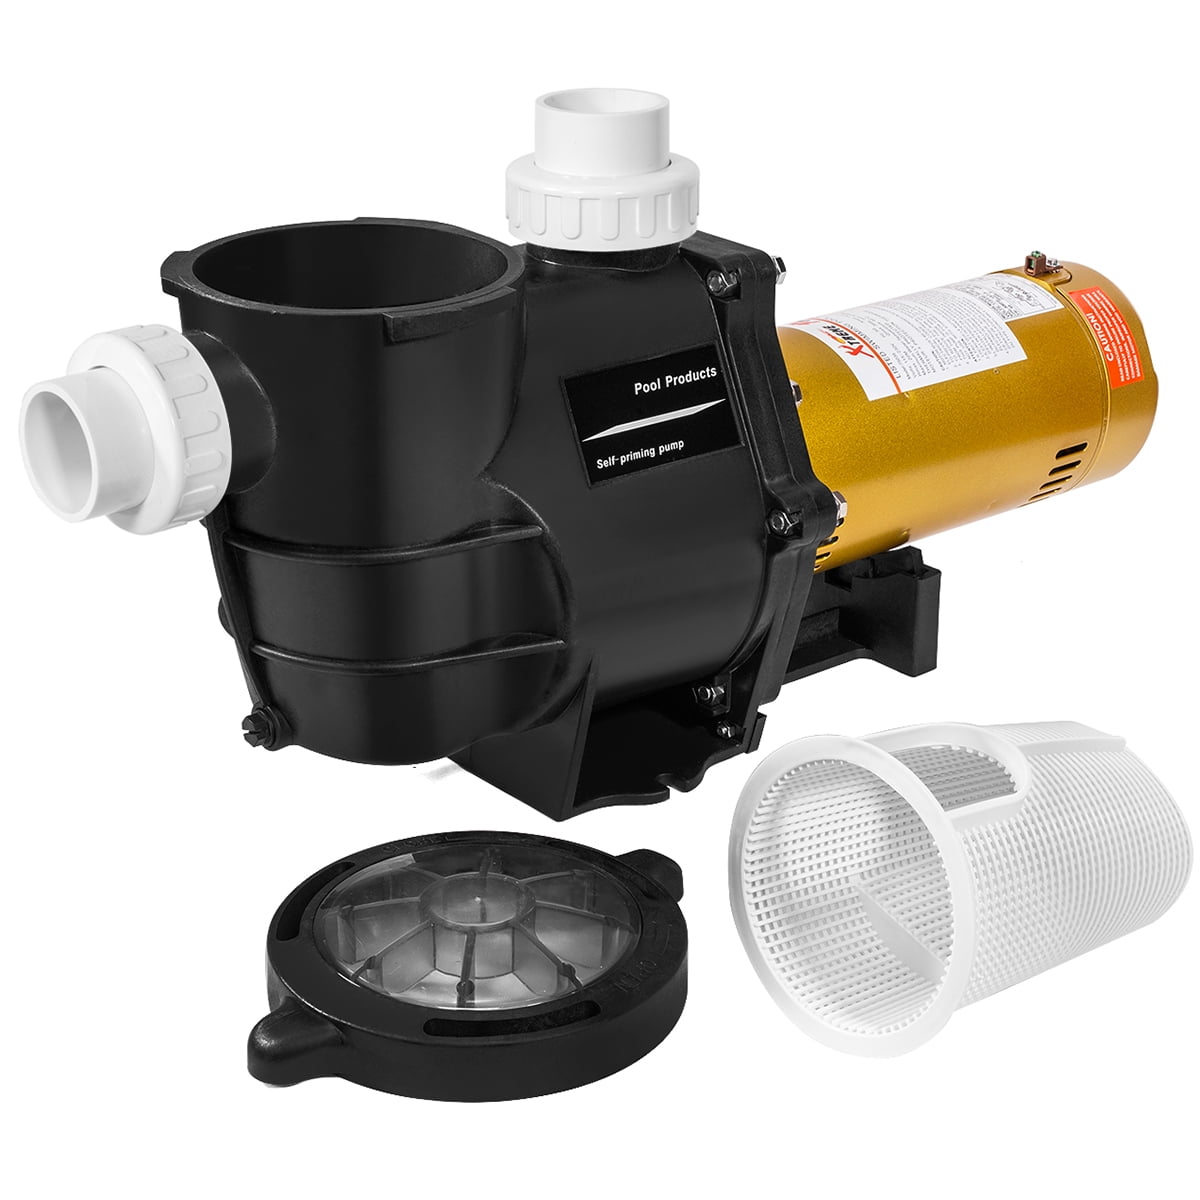 Details about   Swimming Pool Filter Water Pump Suction Sewage Circulating Centrifugal Pump 1.5 